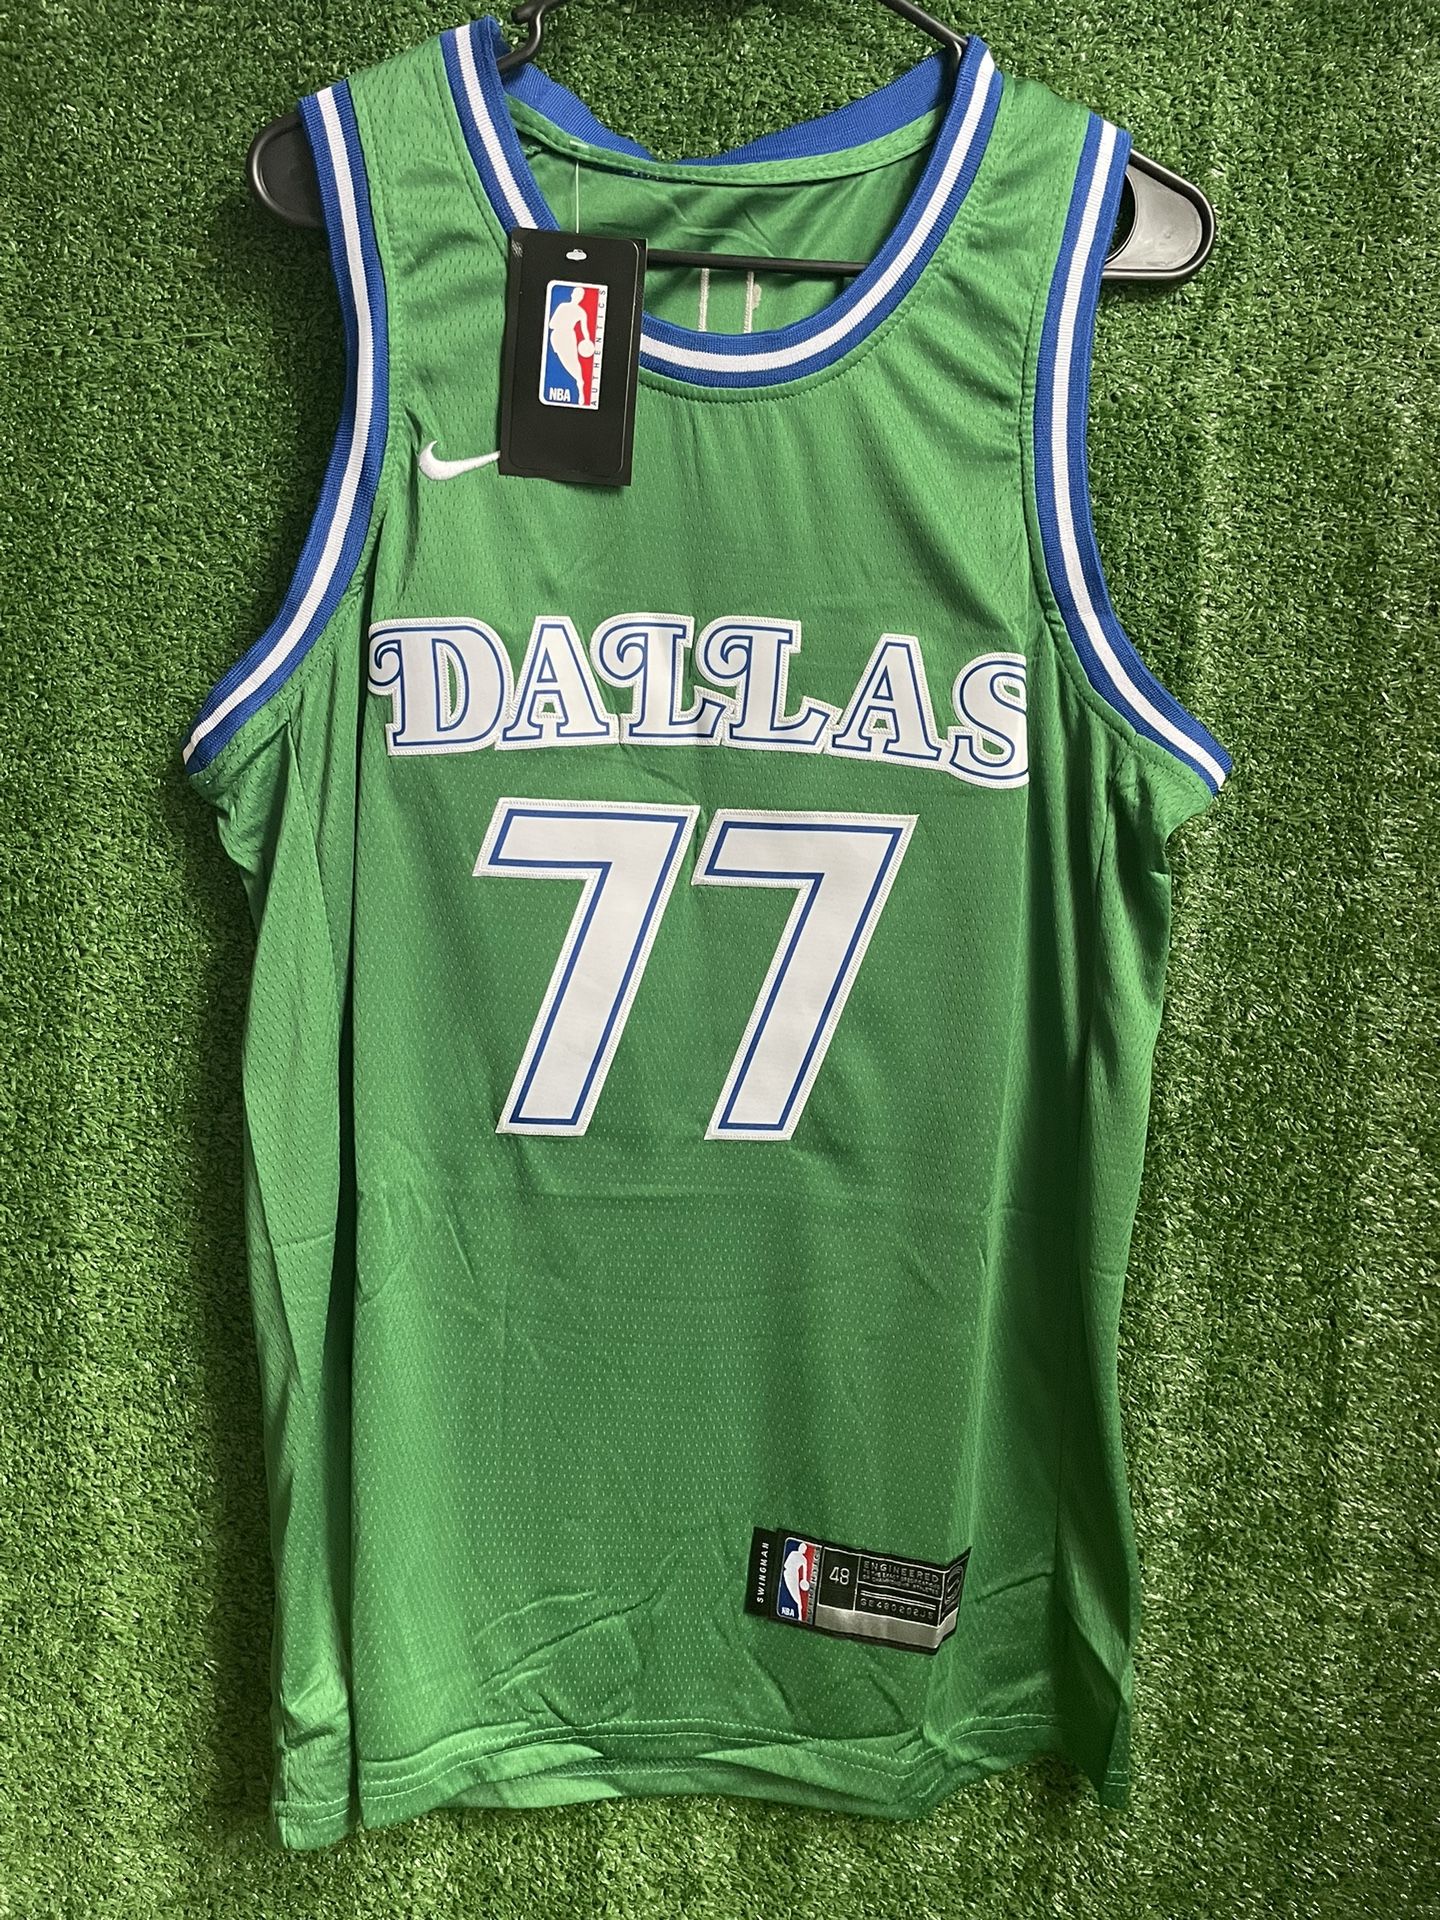 LUKA DONCIC DALLAS MAVERICKS NIKE JERSEY BRAND NEW WITH TAGS SIZES MEDIUM AND XL AVAILABLE